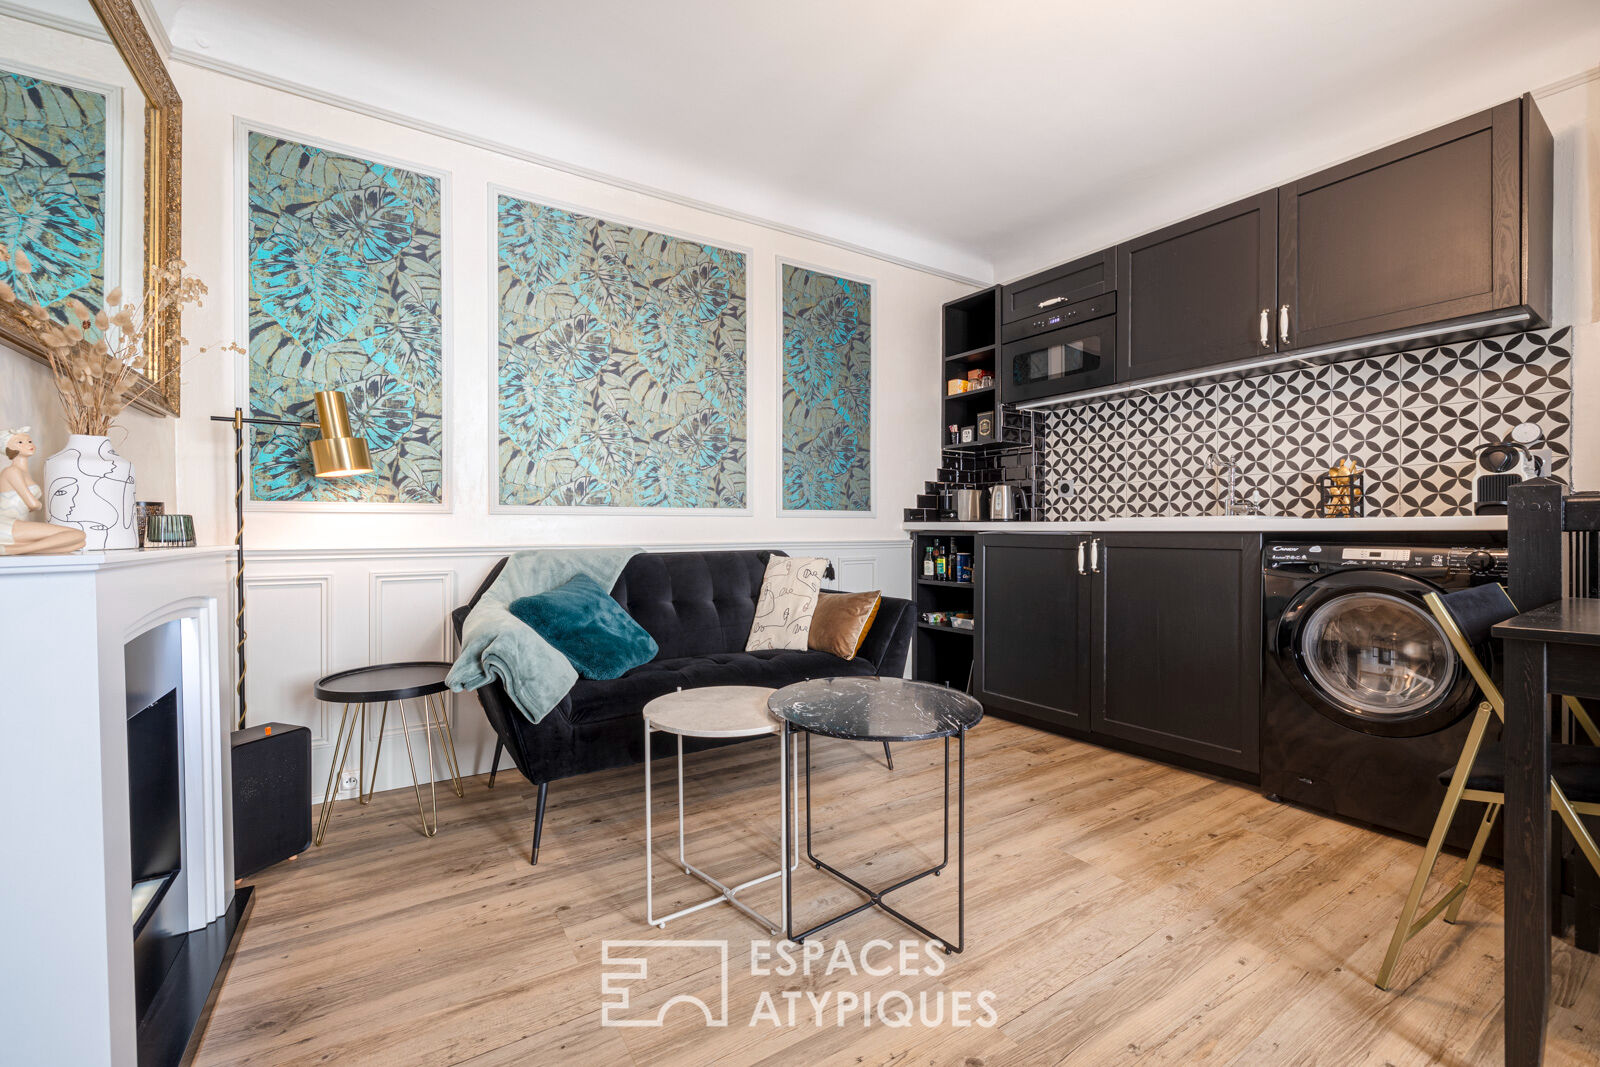 The elegant little duplex in the heart of the Les Halles district